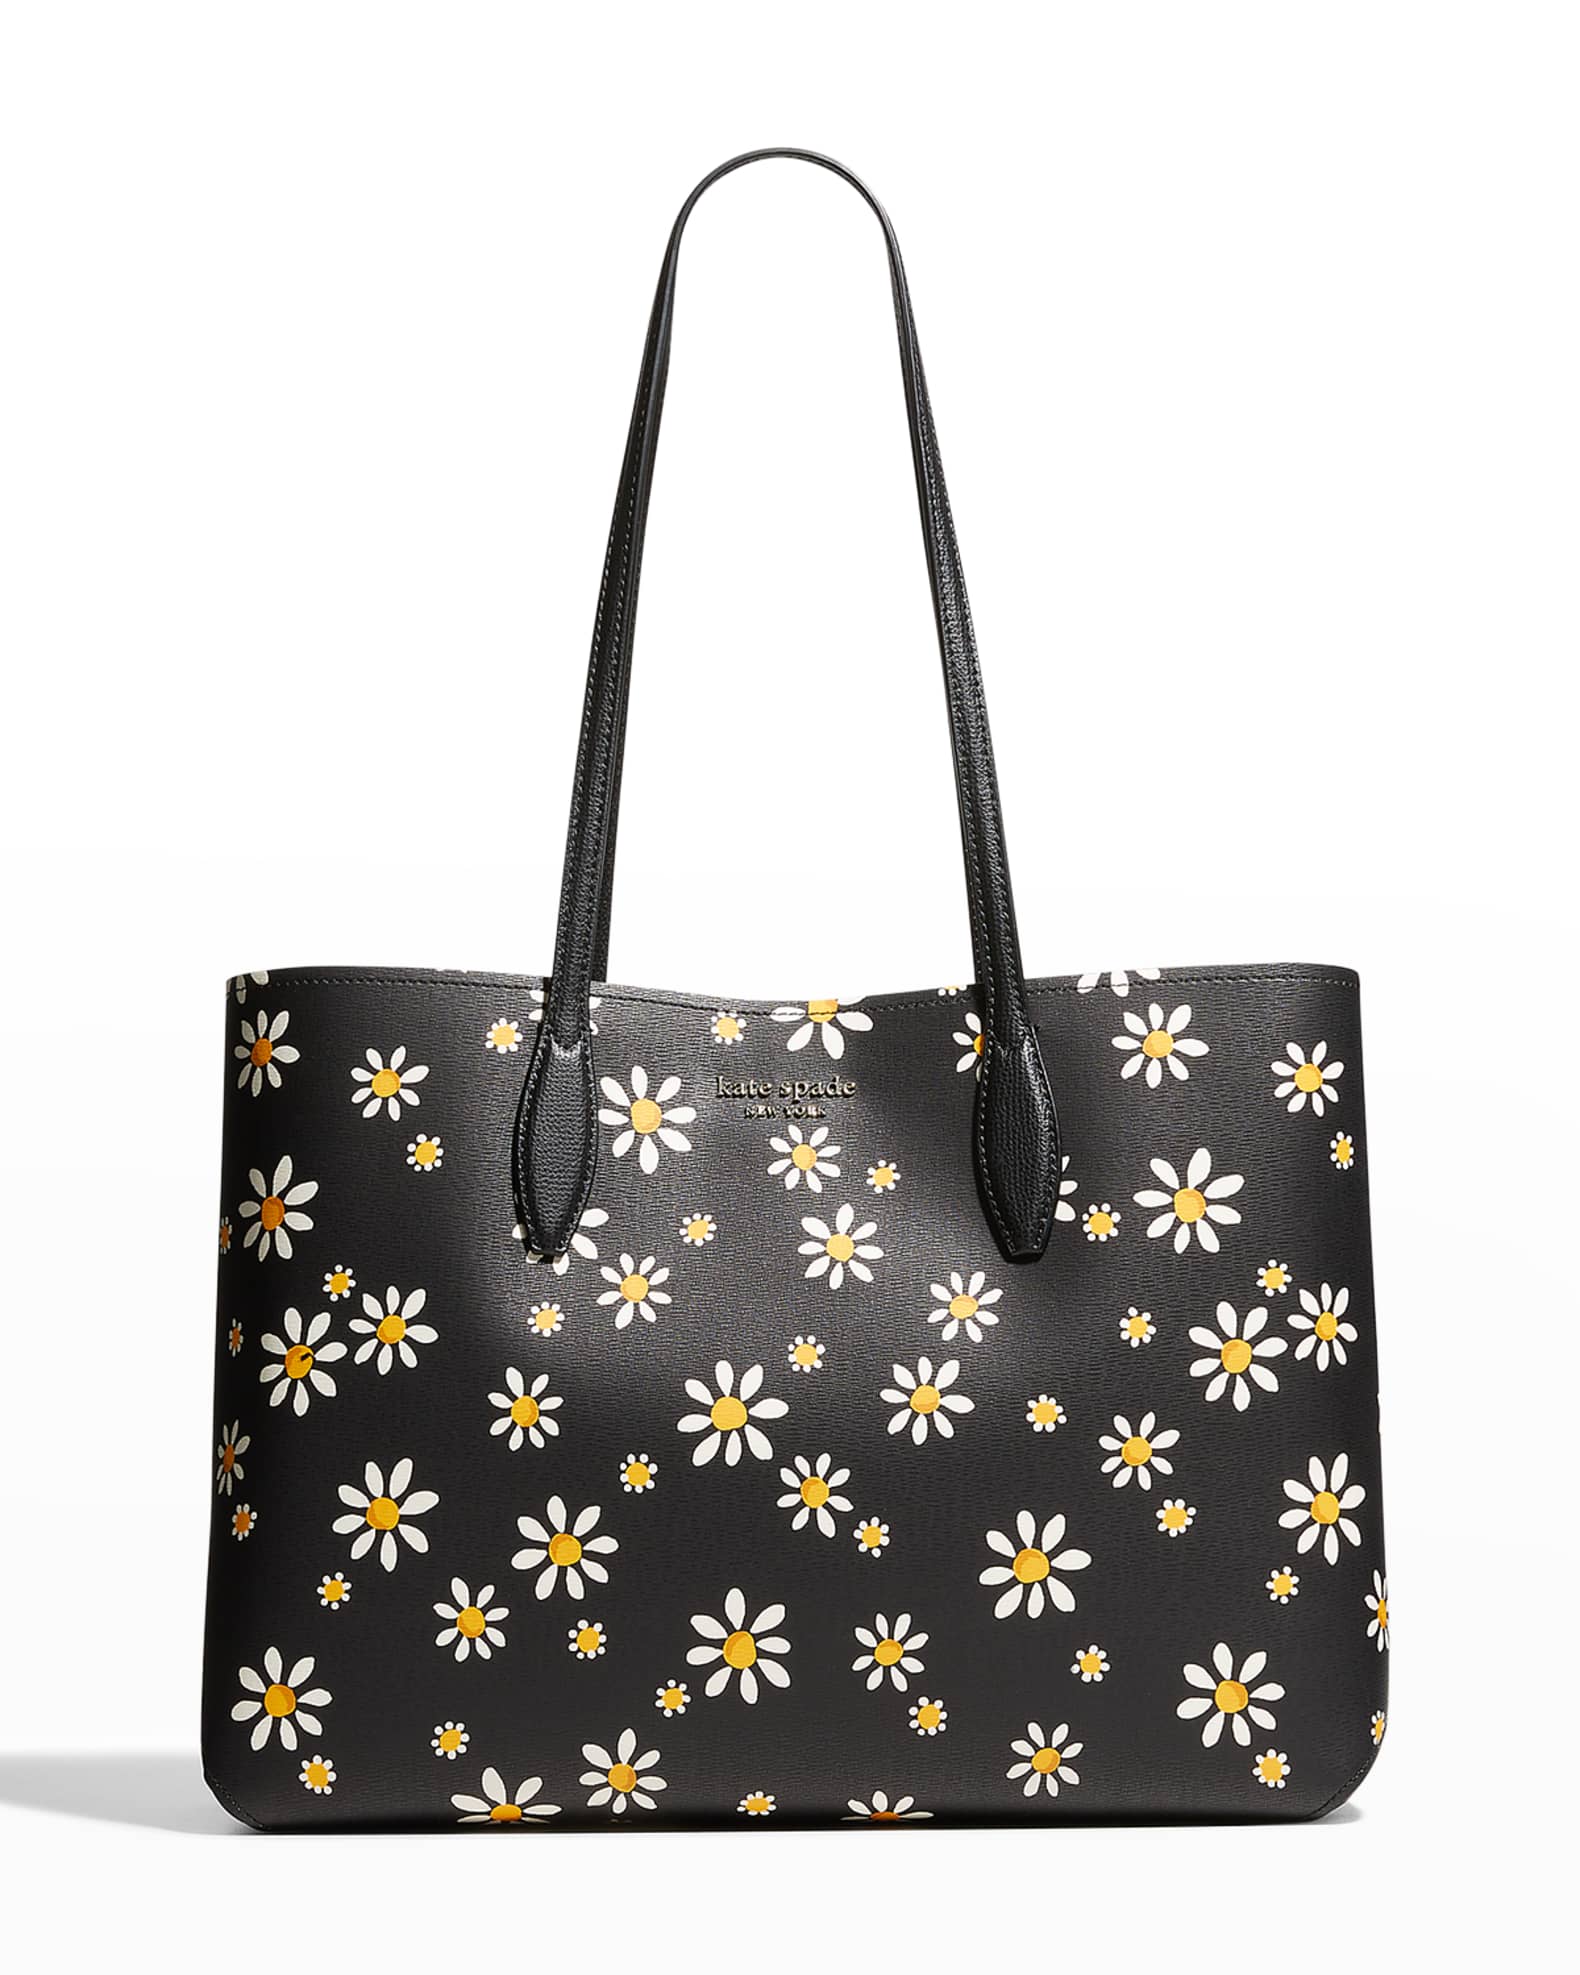 kate spade new york all day daisy jacquard large tote bag | Neiman Marcus